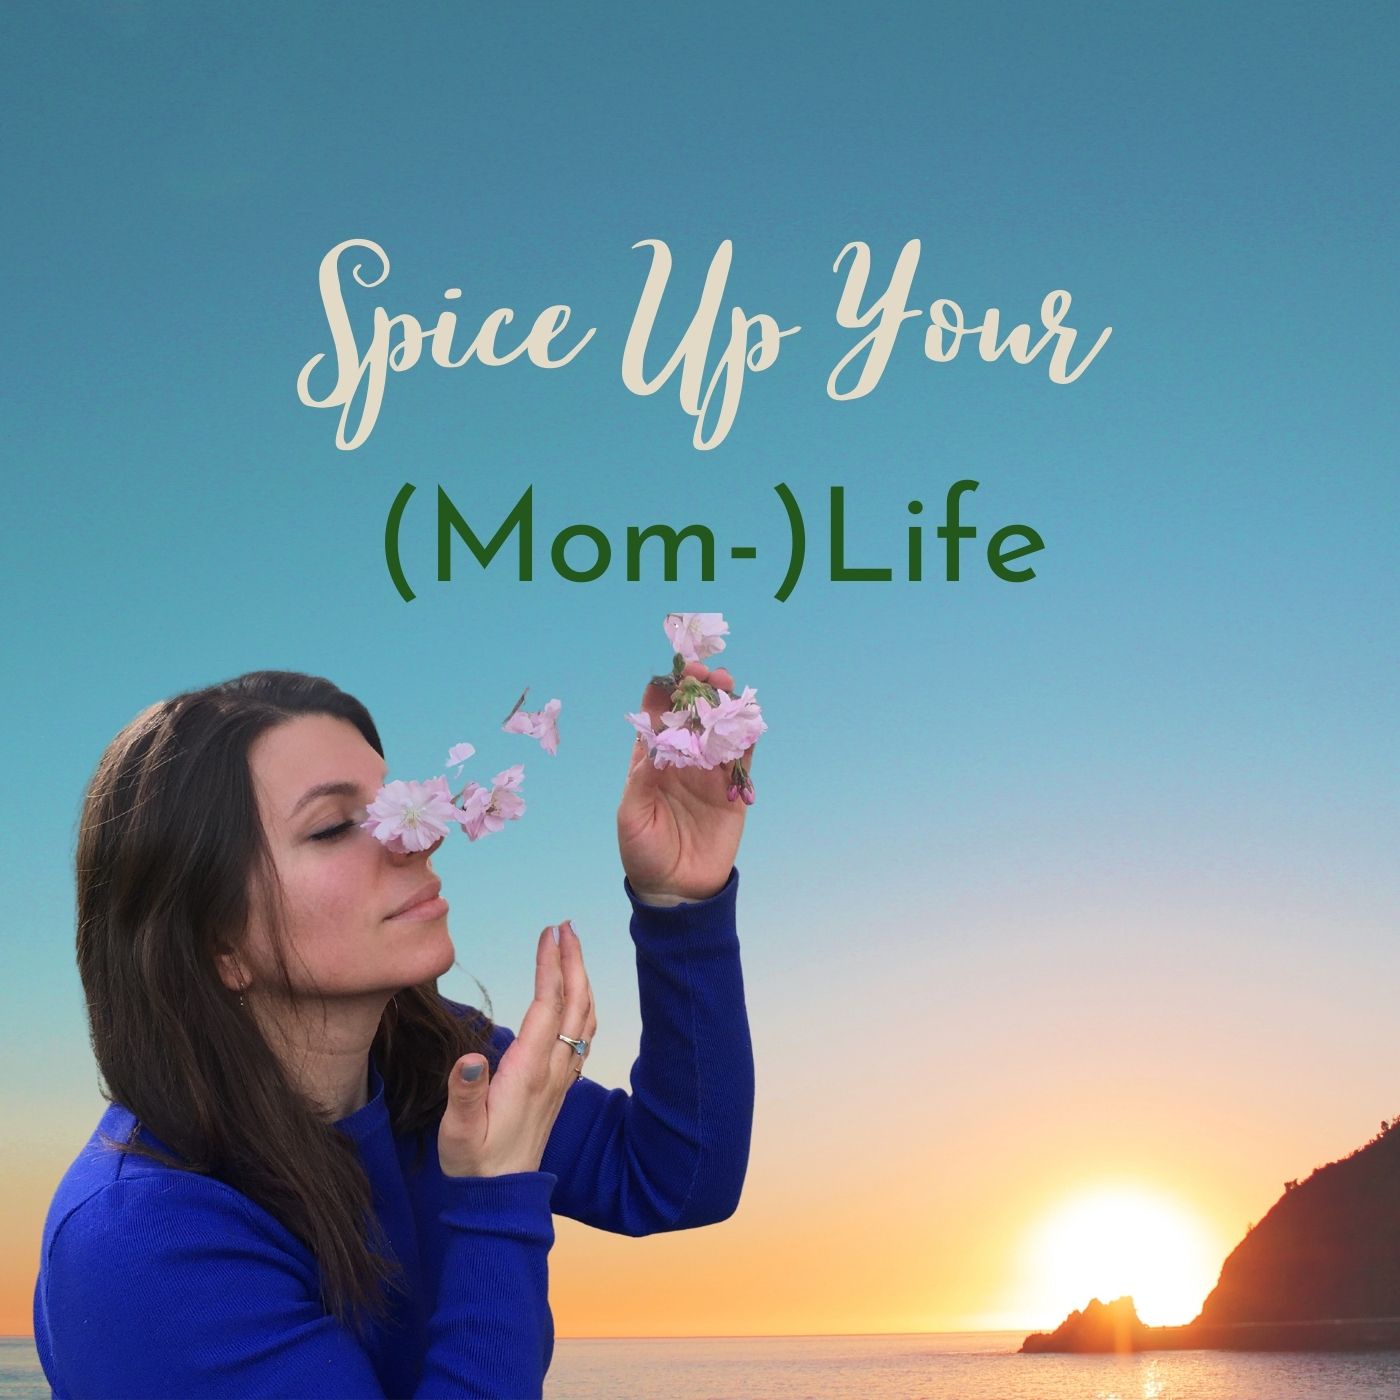 Spice Up Your (Mom-)Life